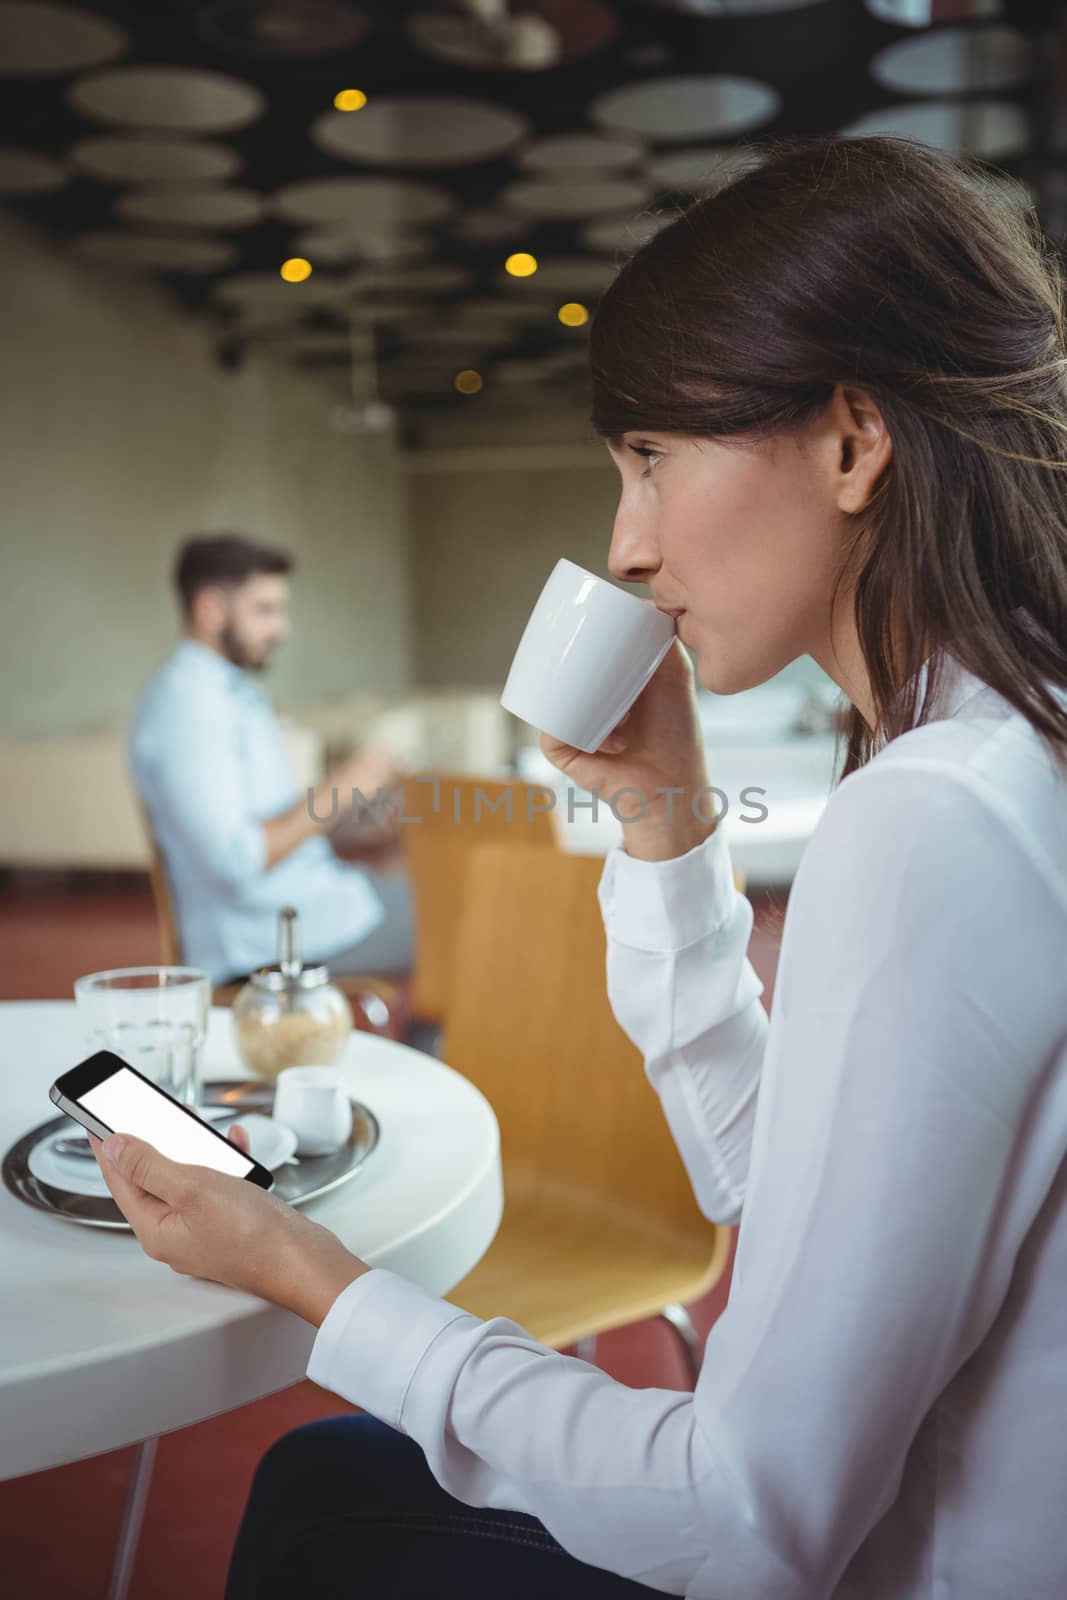 Executive using mobile phone while having coffee in cafÃ© by Wavebreakmedia